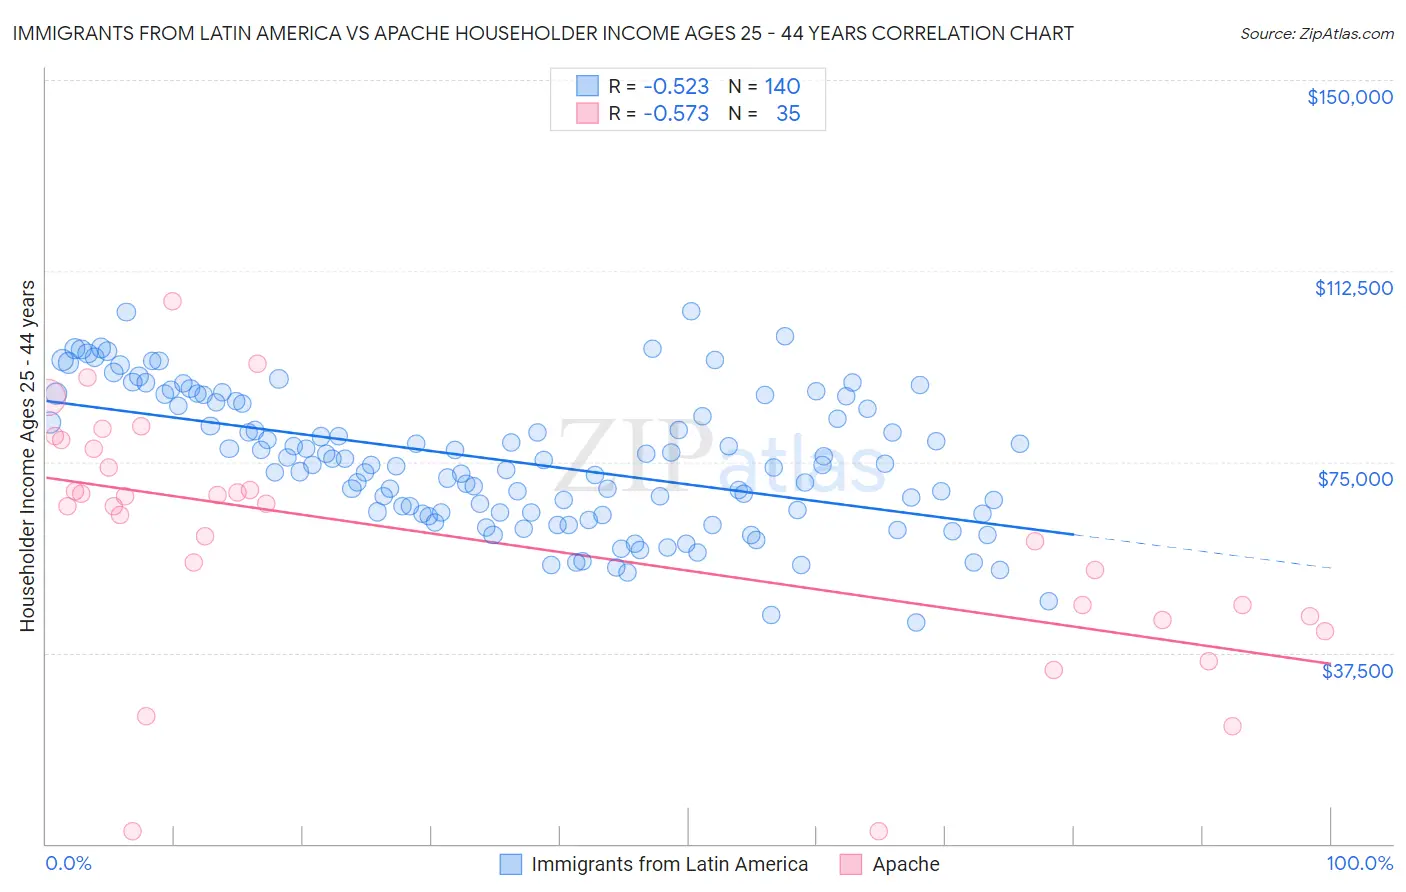 Immigrants from Latin America vs Apache Householder Income Ages 25 - 44 years